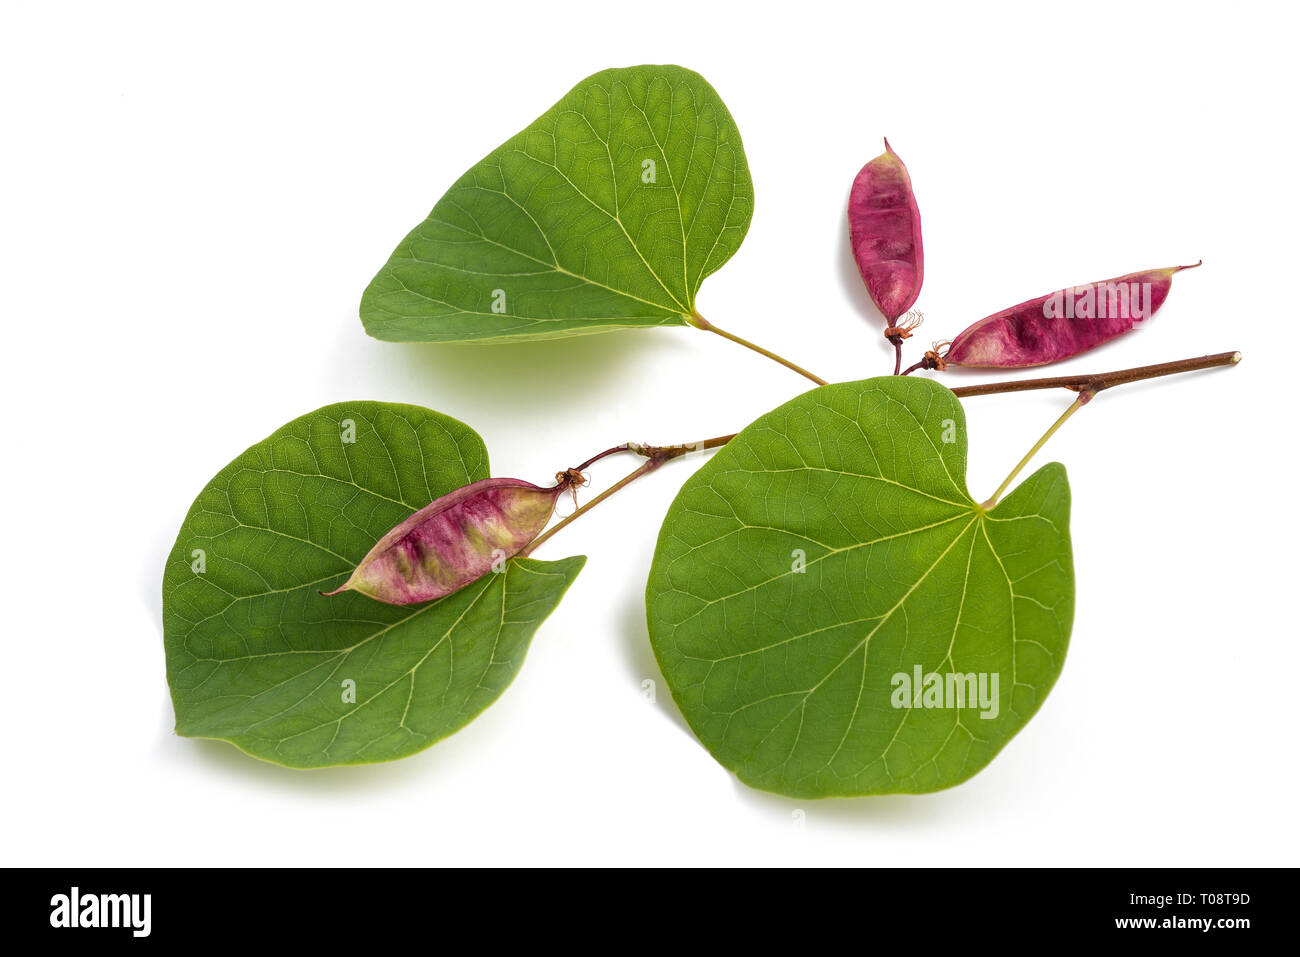 Cercis siliquastrum( Judas tree ) branch with leaves and fruits isolated on white Stock Photo